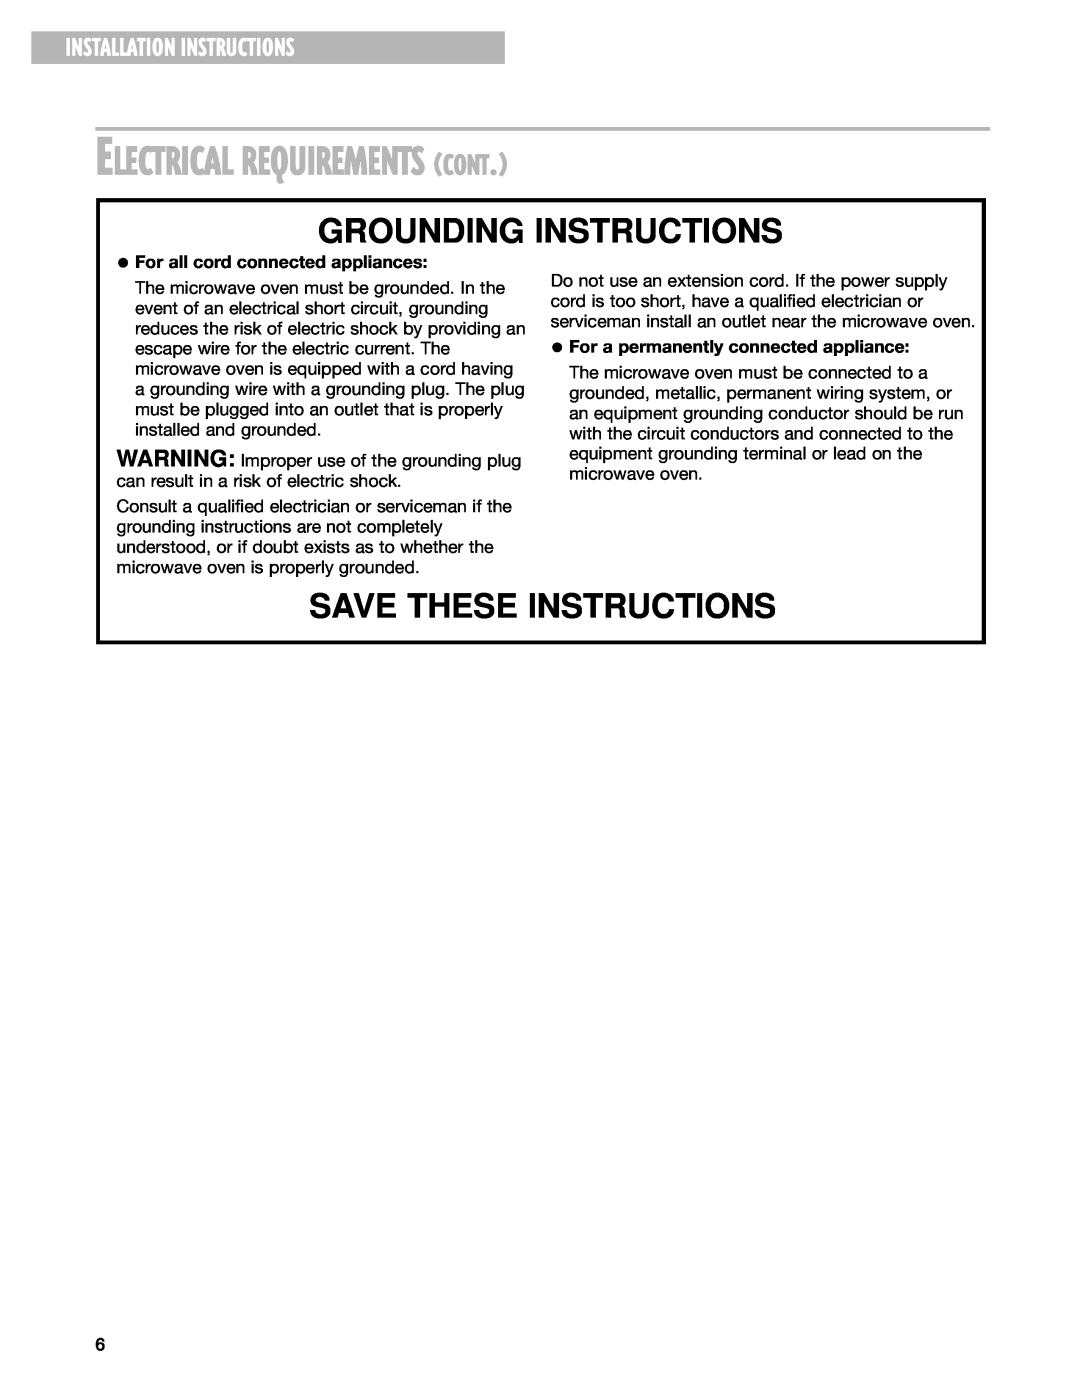 Whirlpool MT4210SL Electrical Requirements Cont, Grounding Instructions, Installation Instructions 